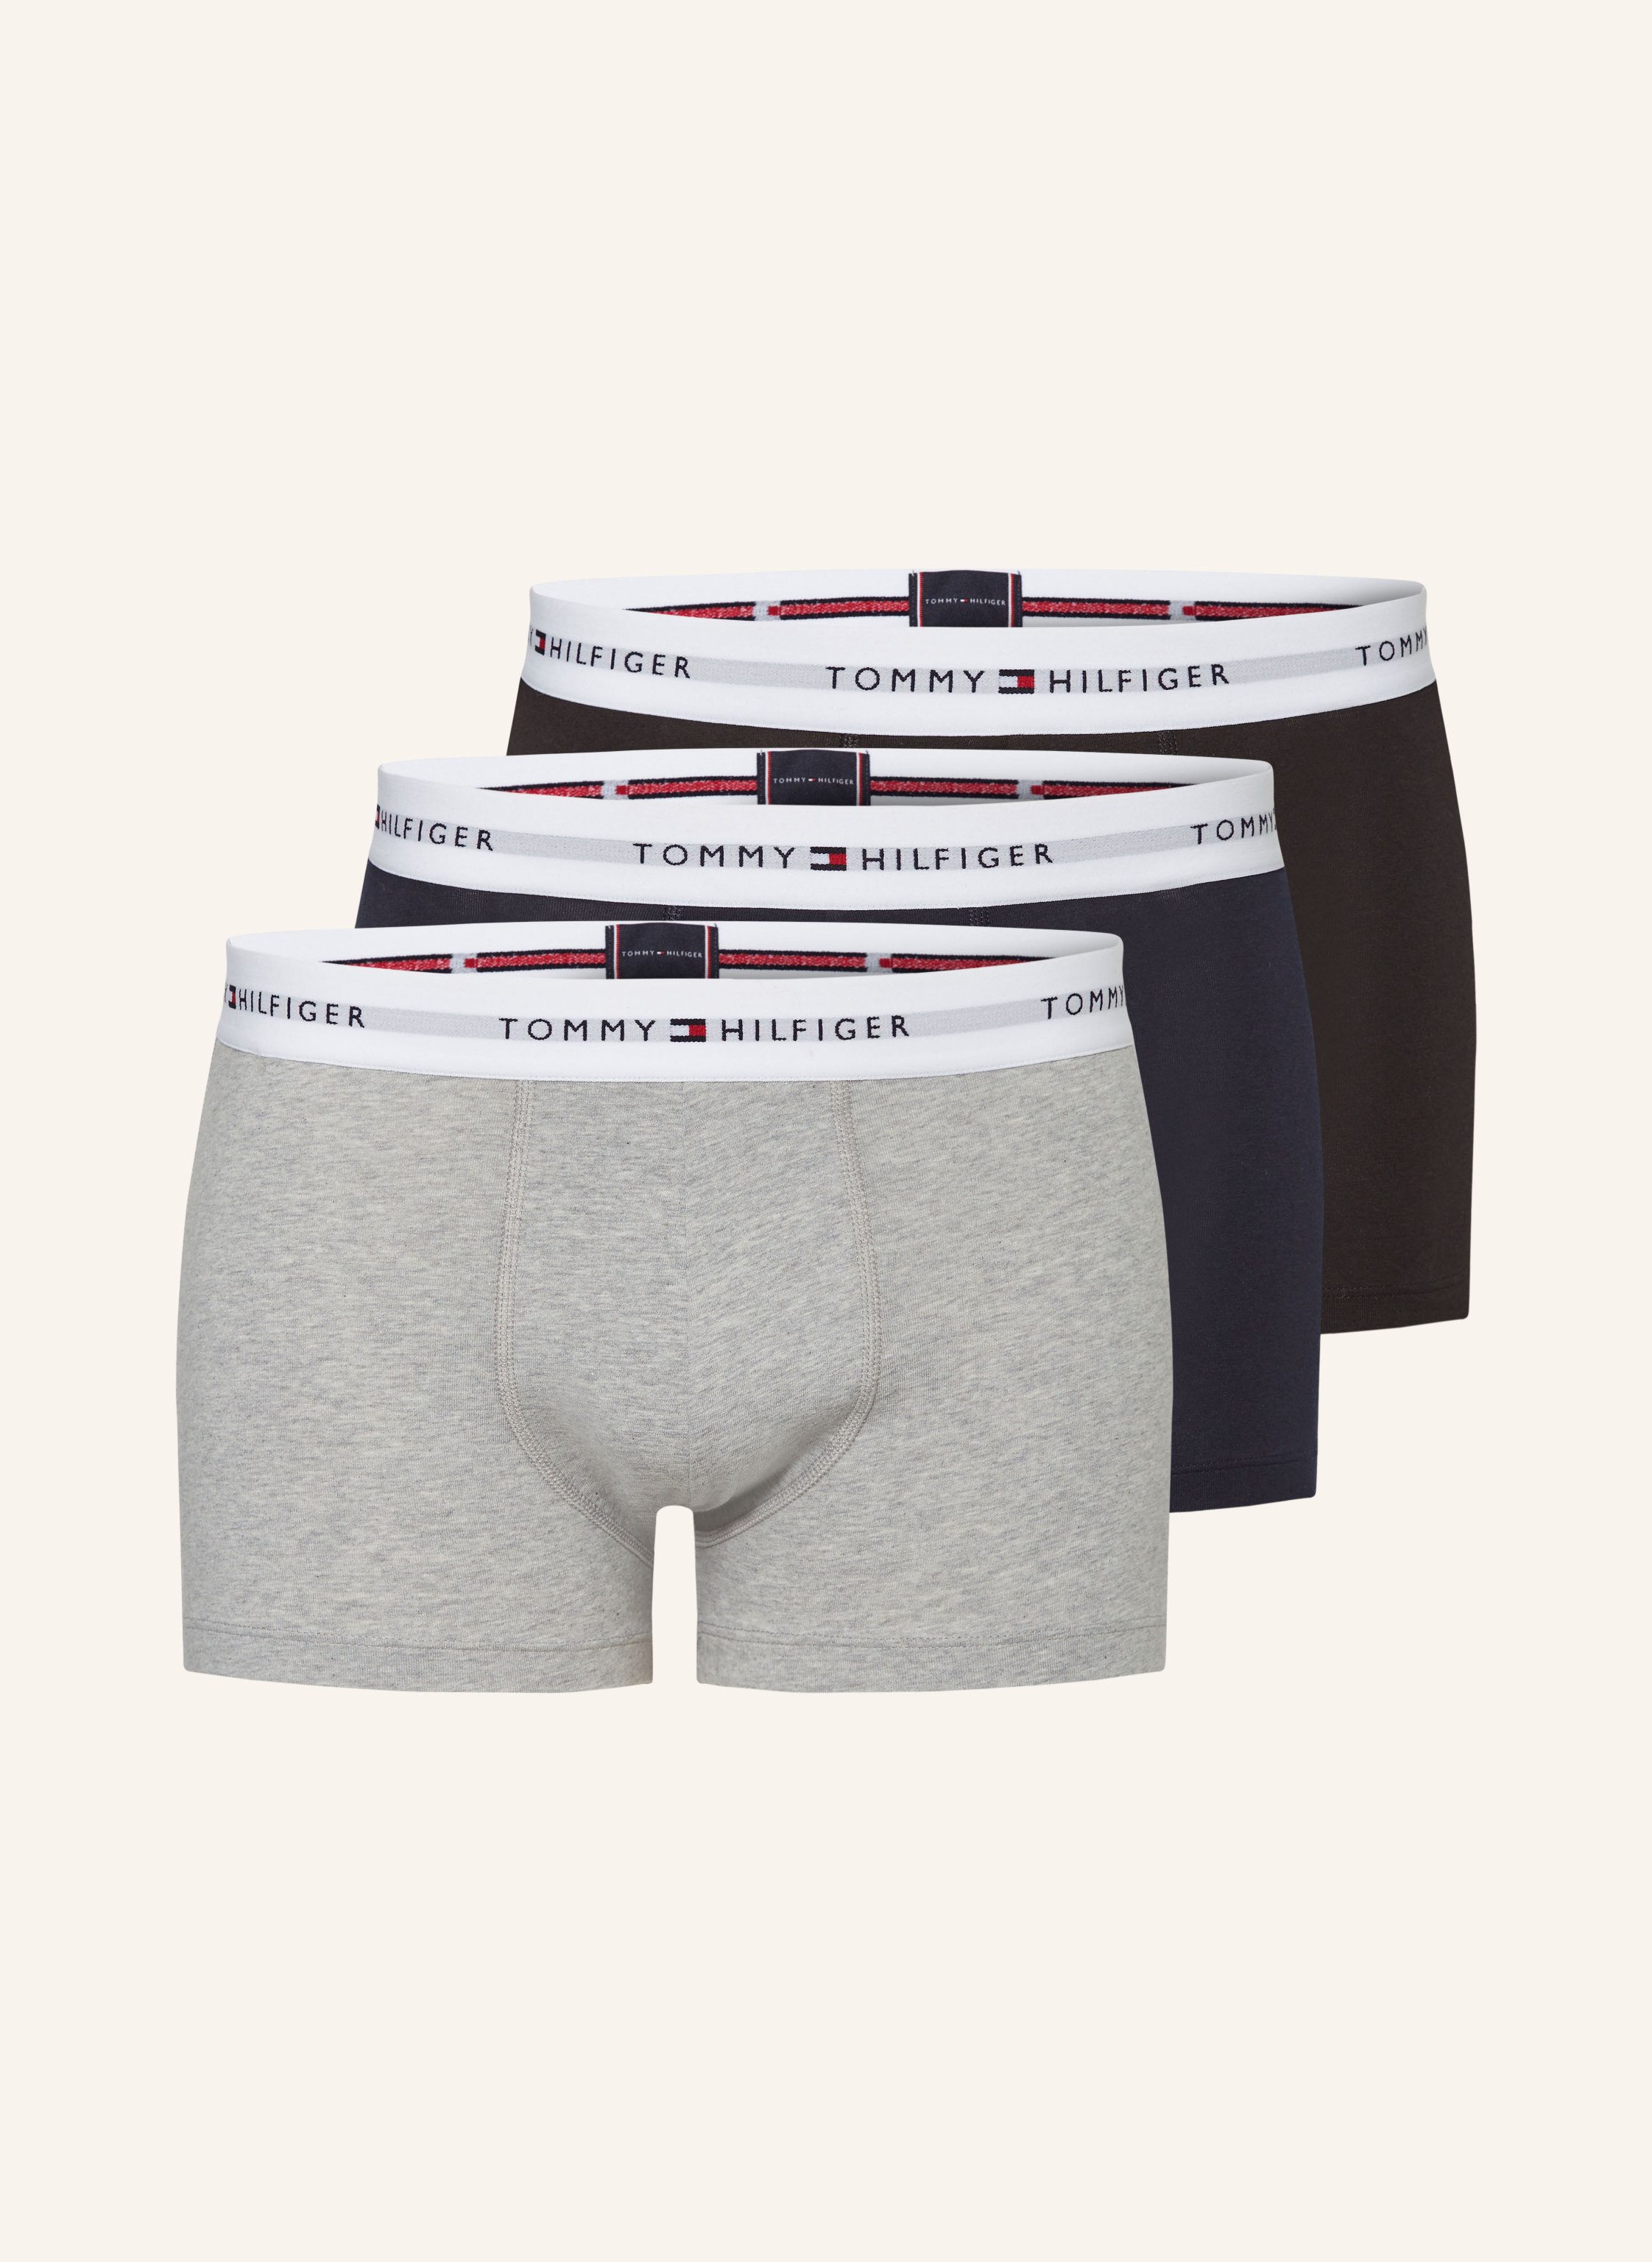 TOMMY HILFIGER 3-pack boxer shorts in black/ light gray